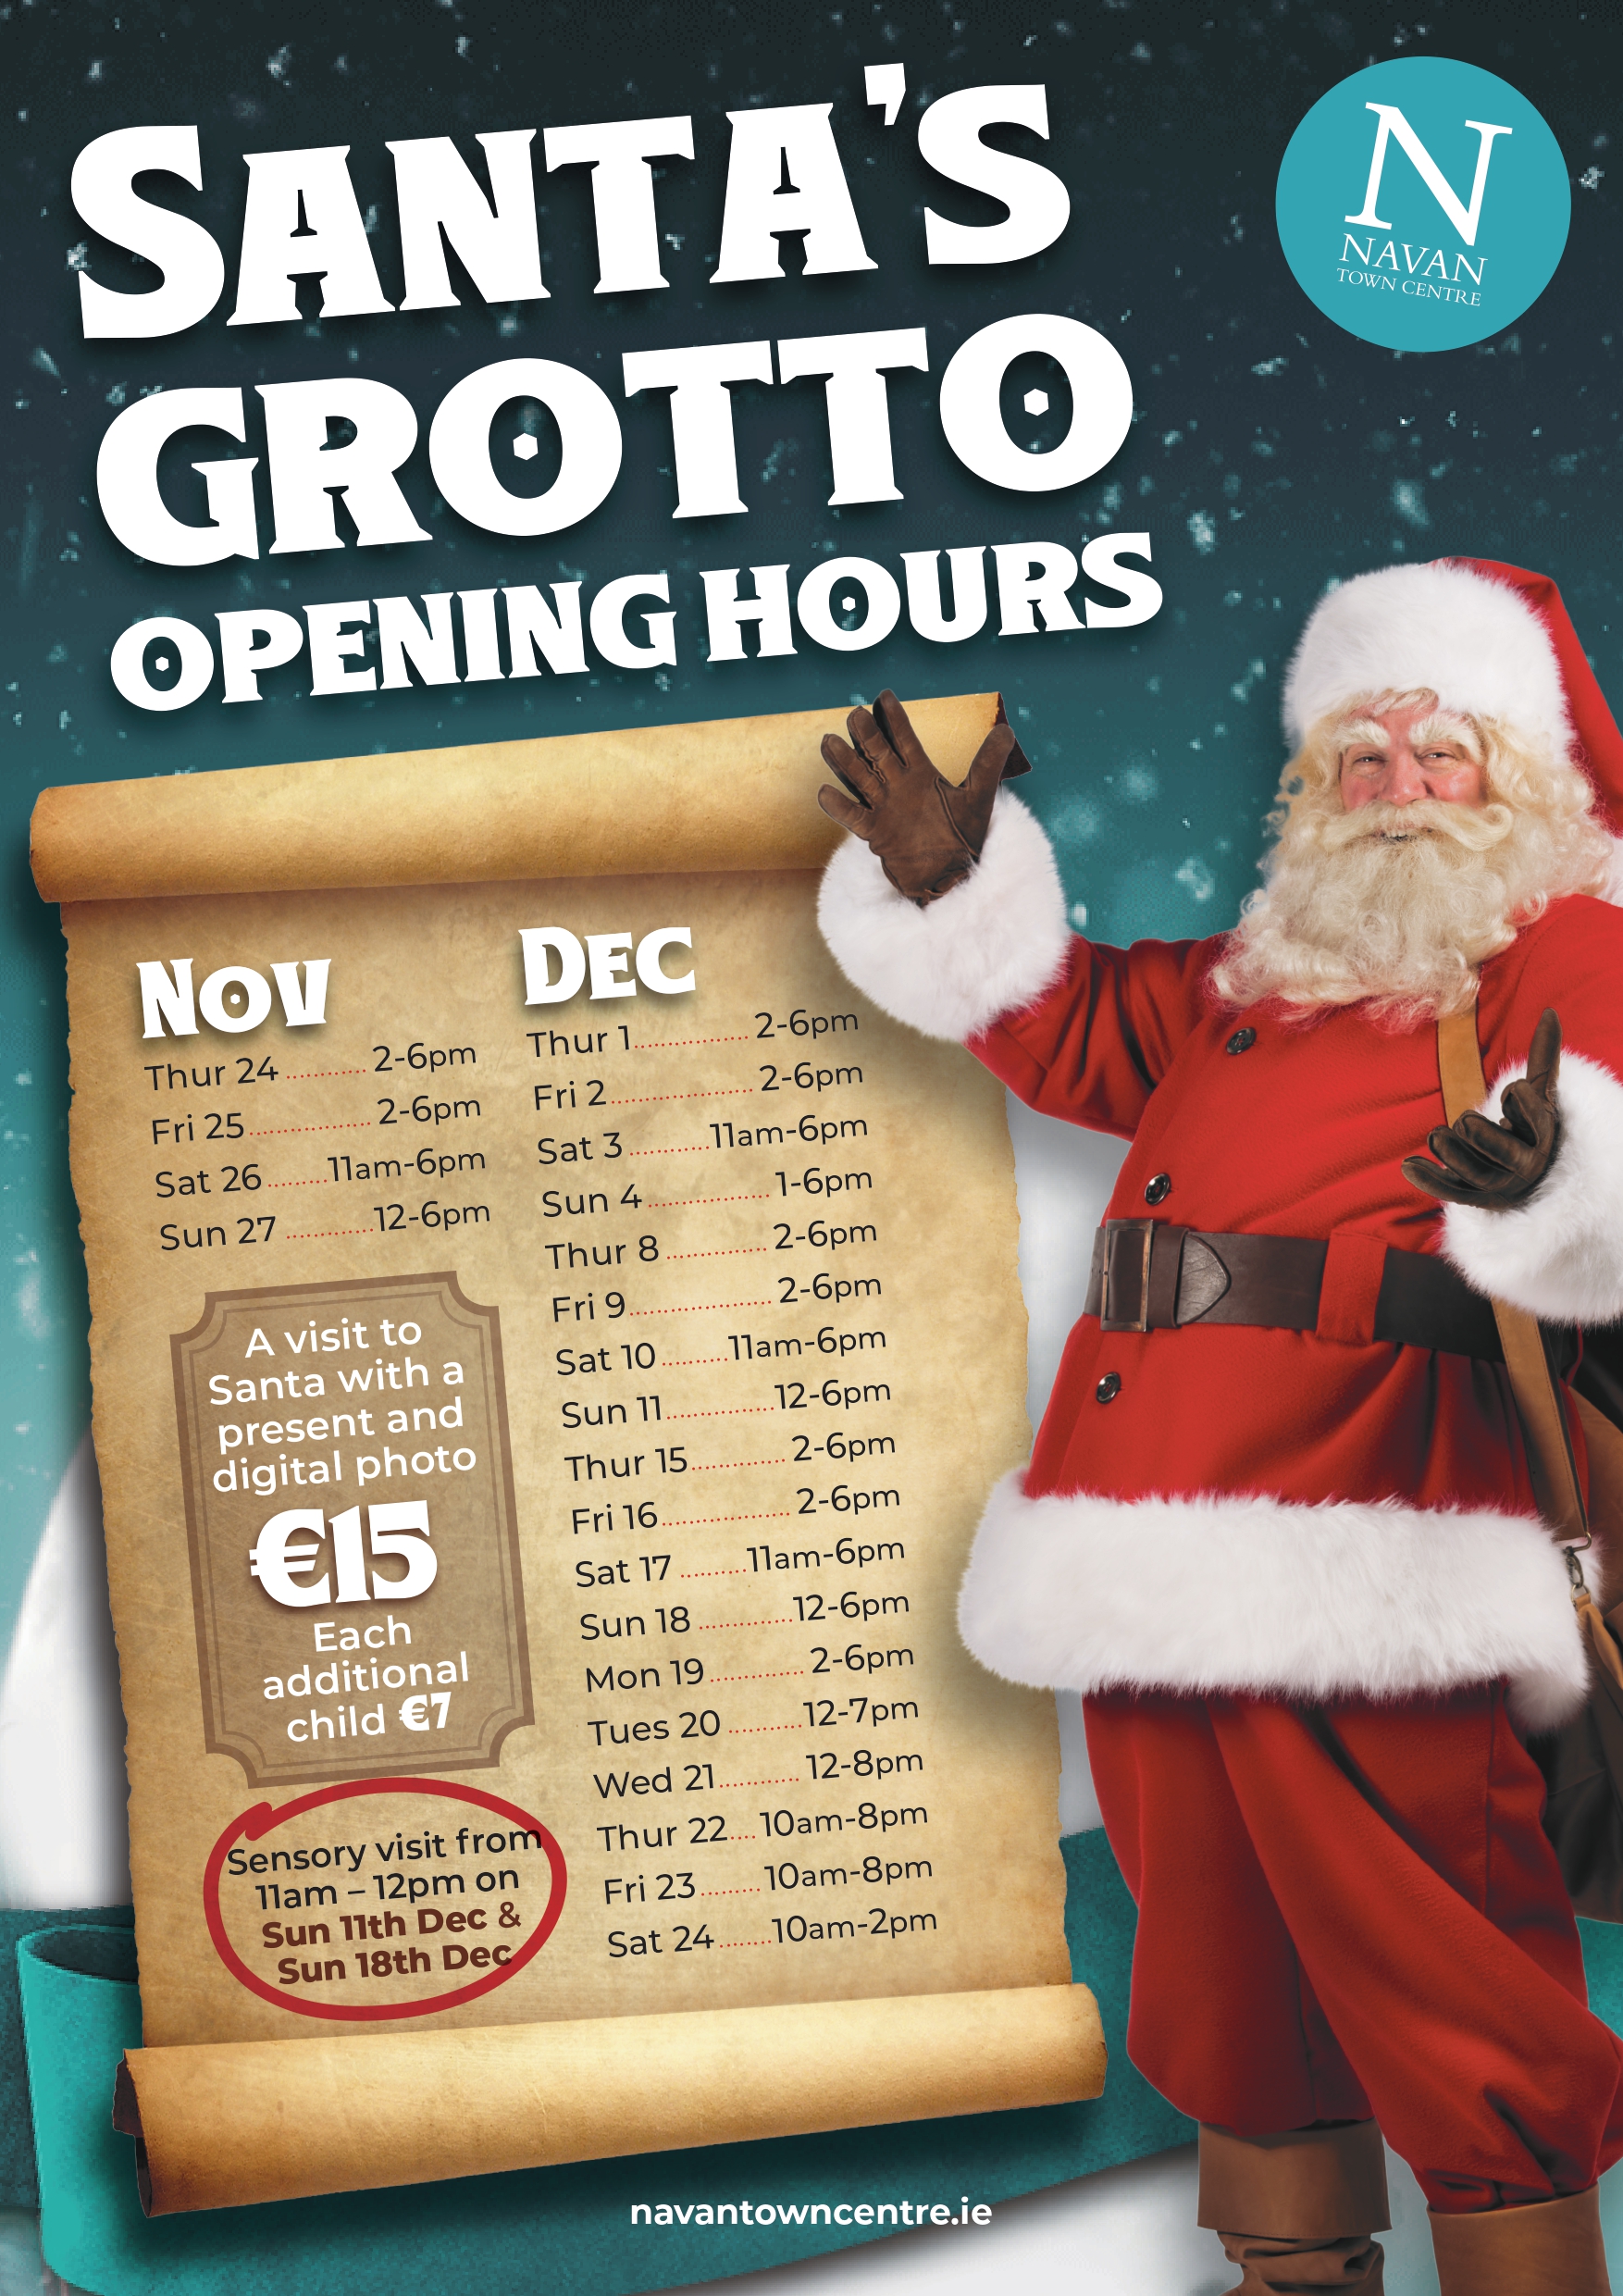 Grotto Opening Hours